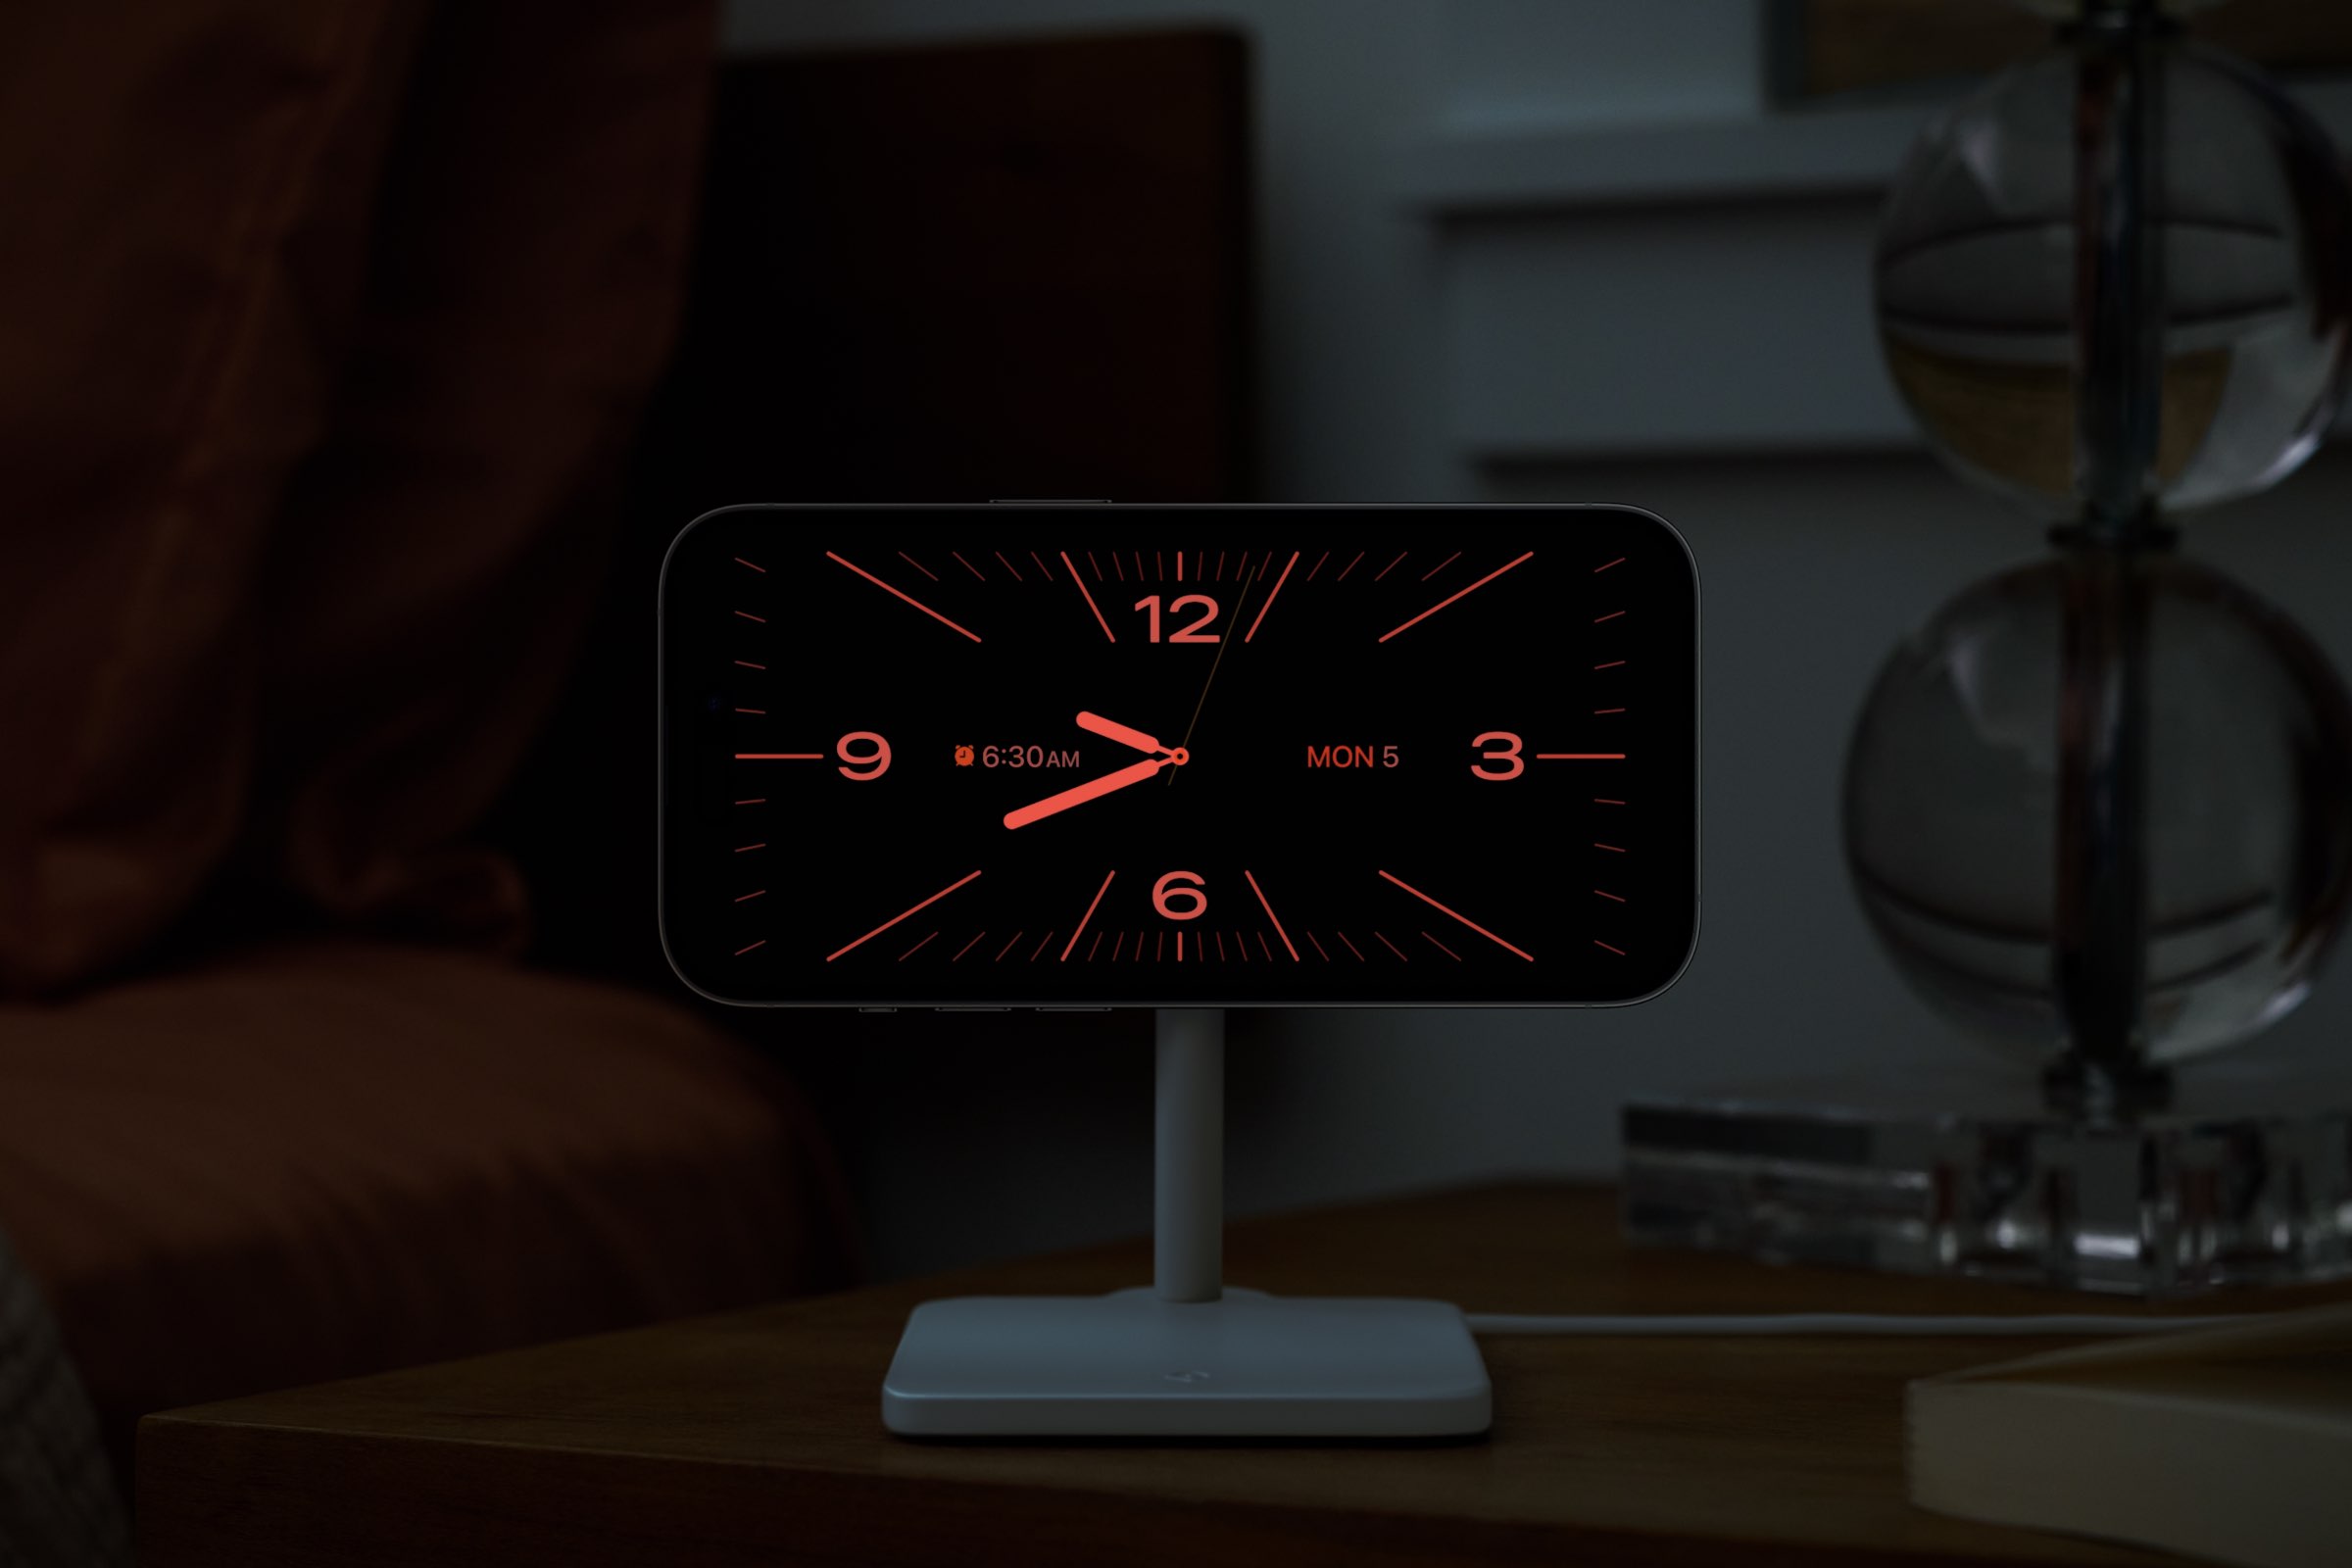 Nomad Stand review: An iPhone charger for Standby mode